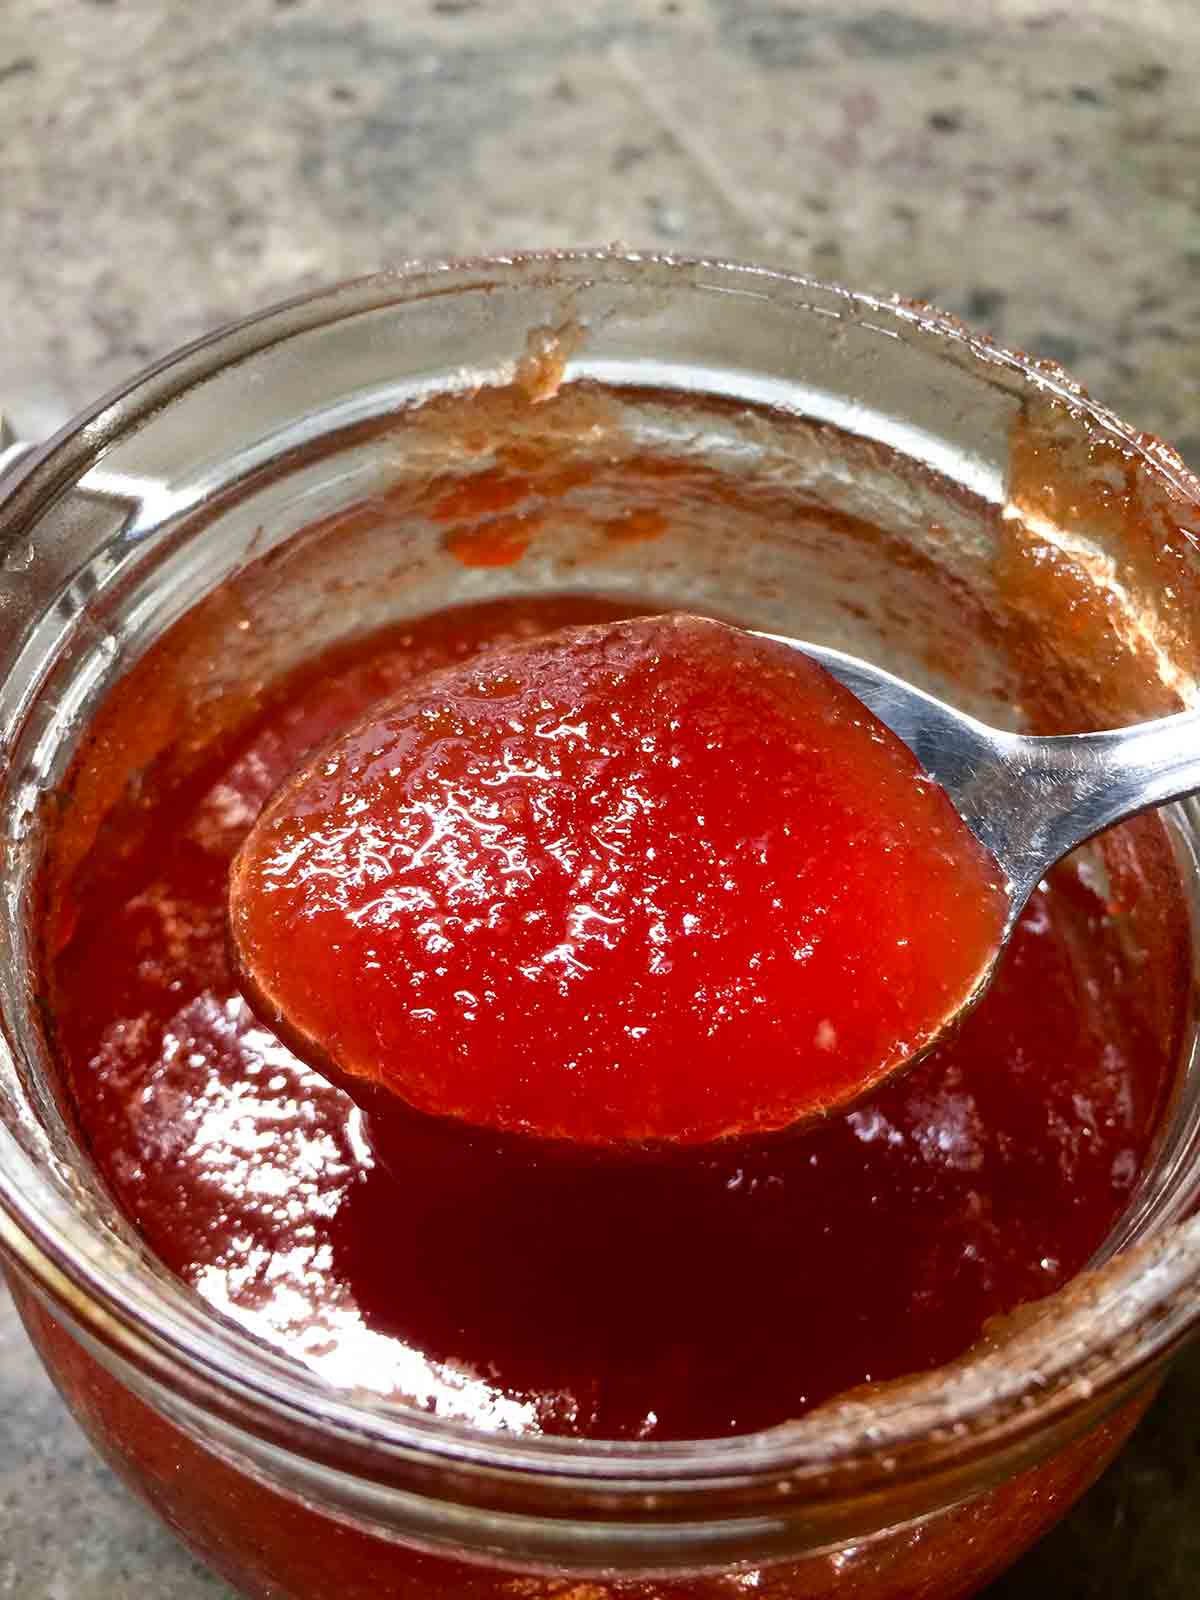 A jar of Portuguese tomato jelly with a filled spoon above it.